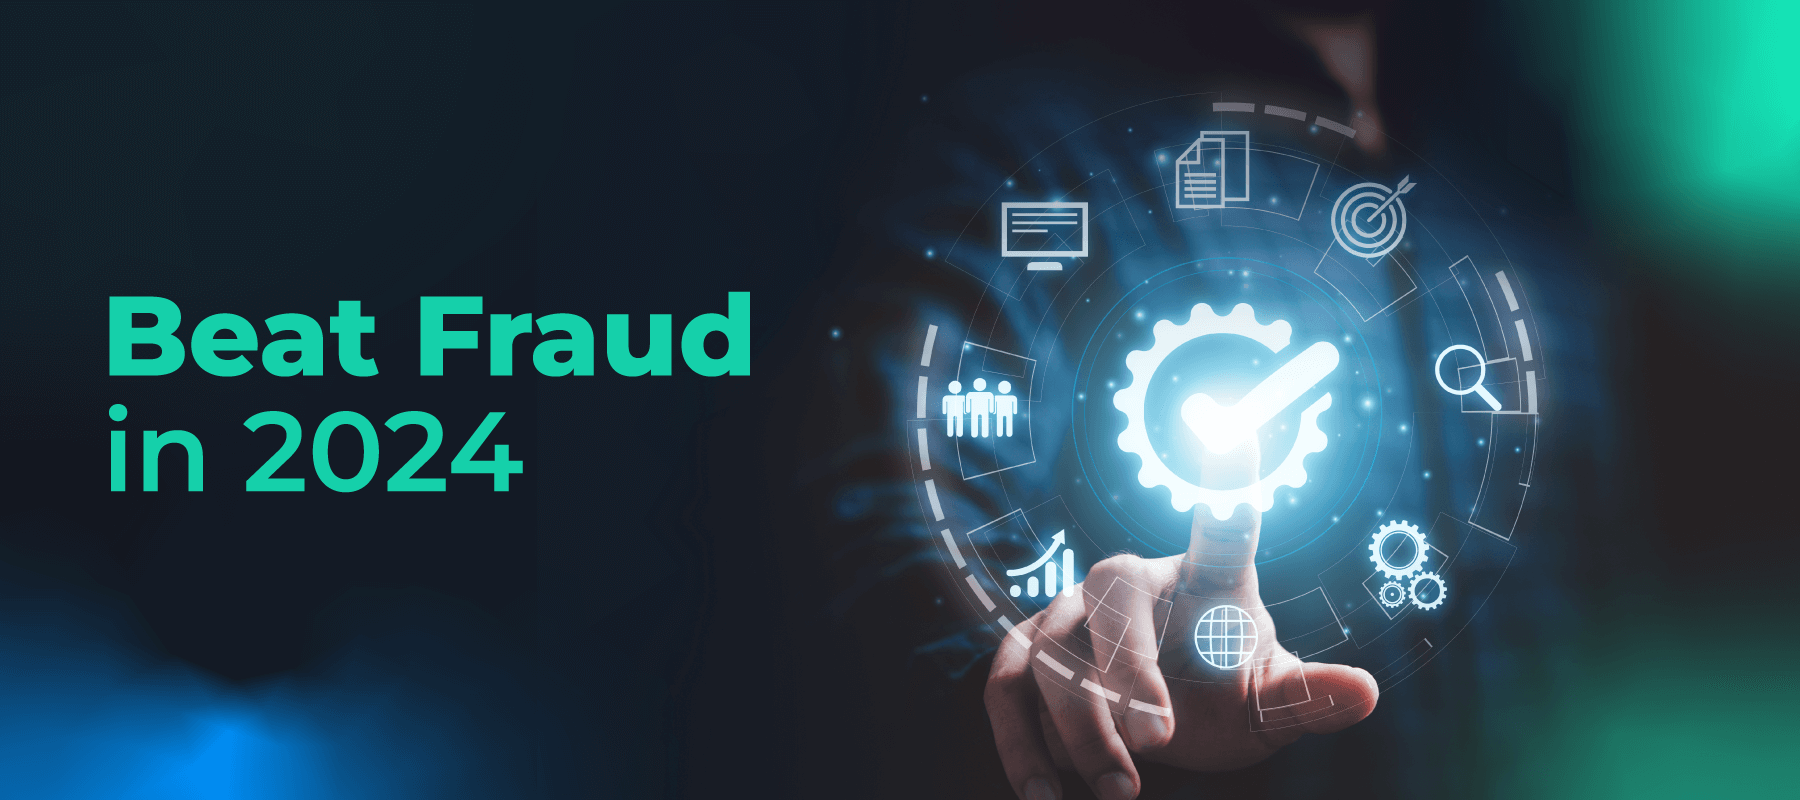 6 Steps to Beat Fraud in 2024